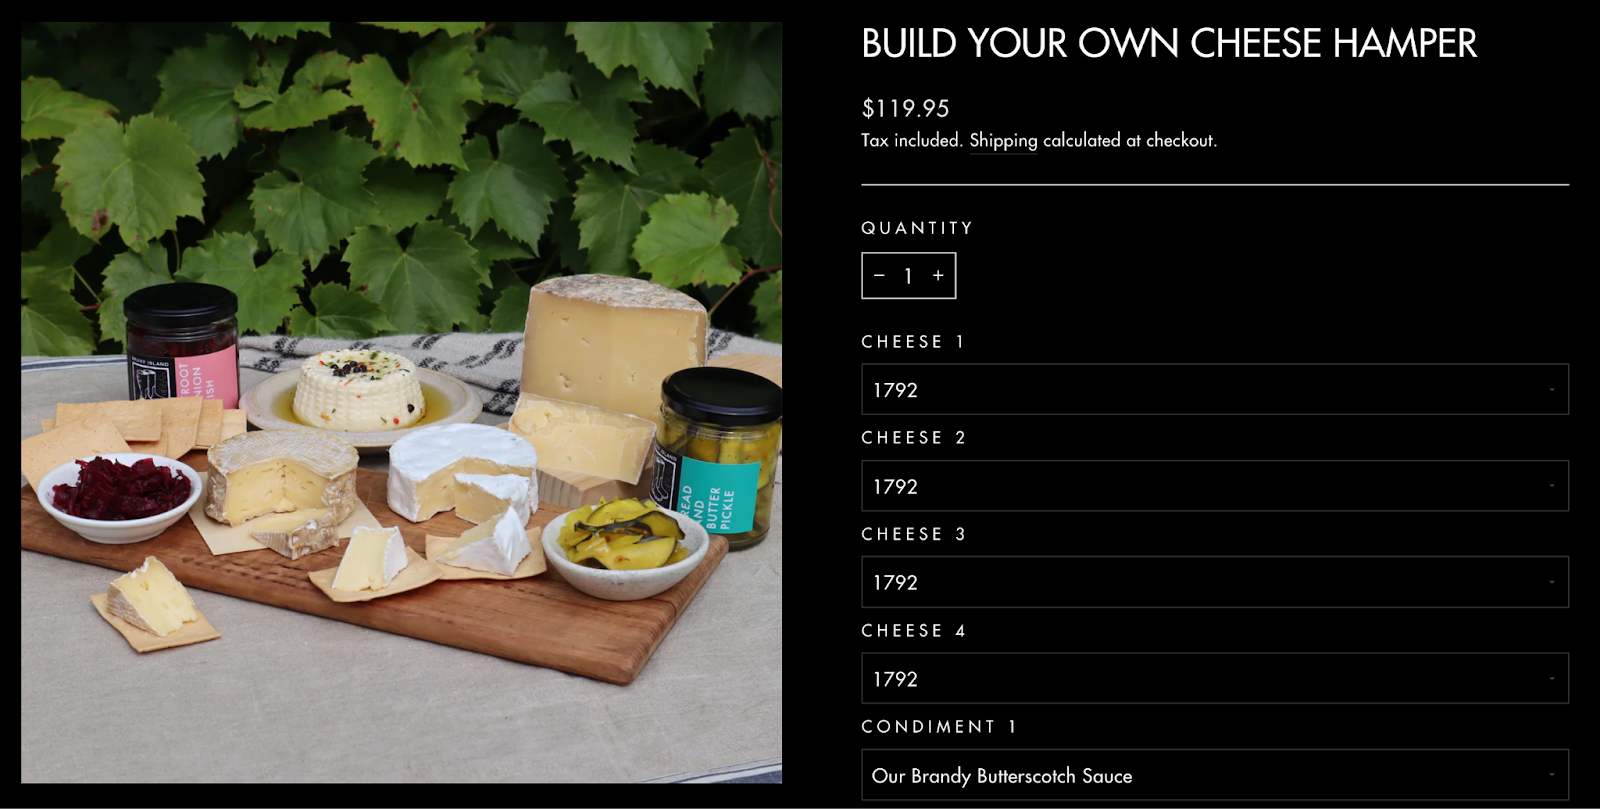 Screenshot of a product bundle called "Build Your Own Cheese Hamper" where customers and select their cheese types.